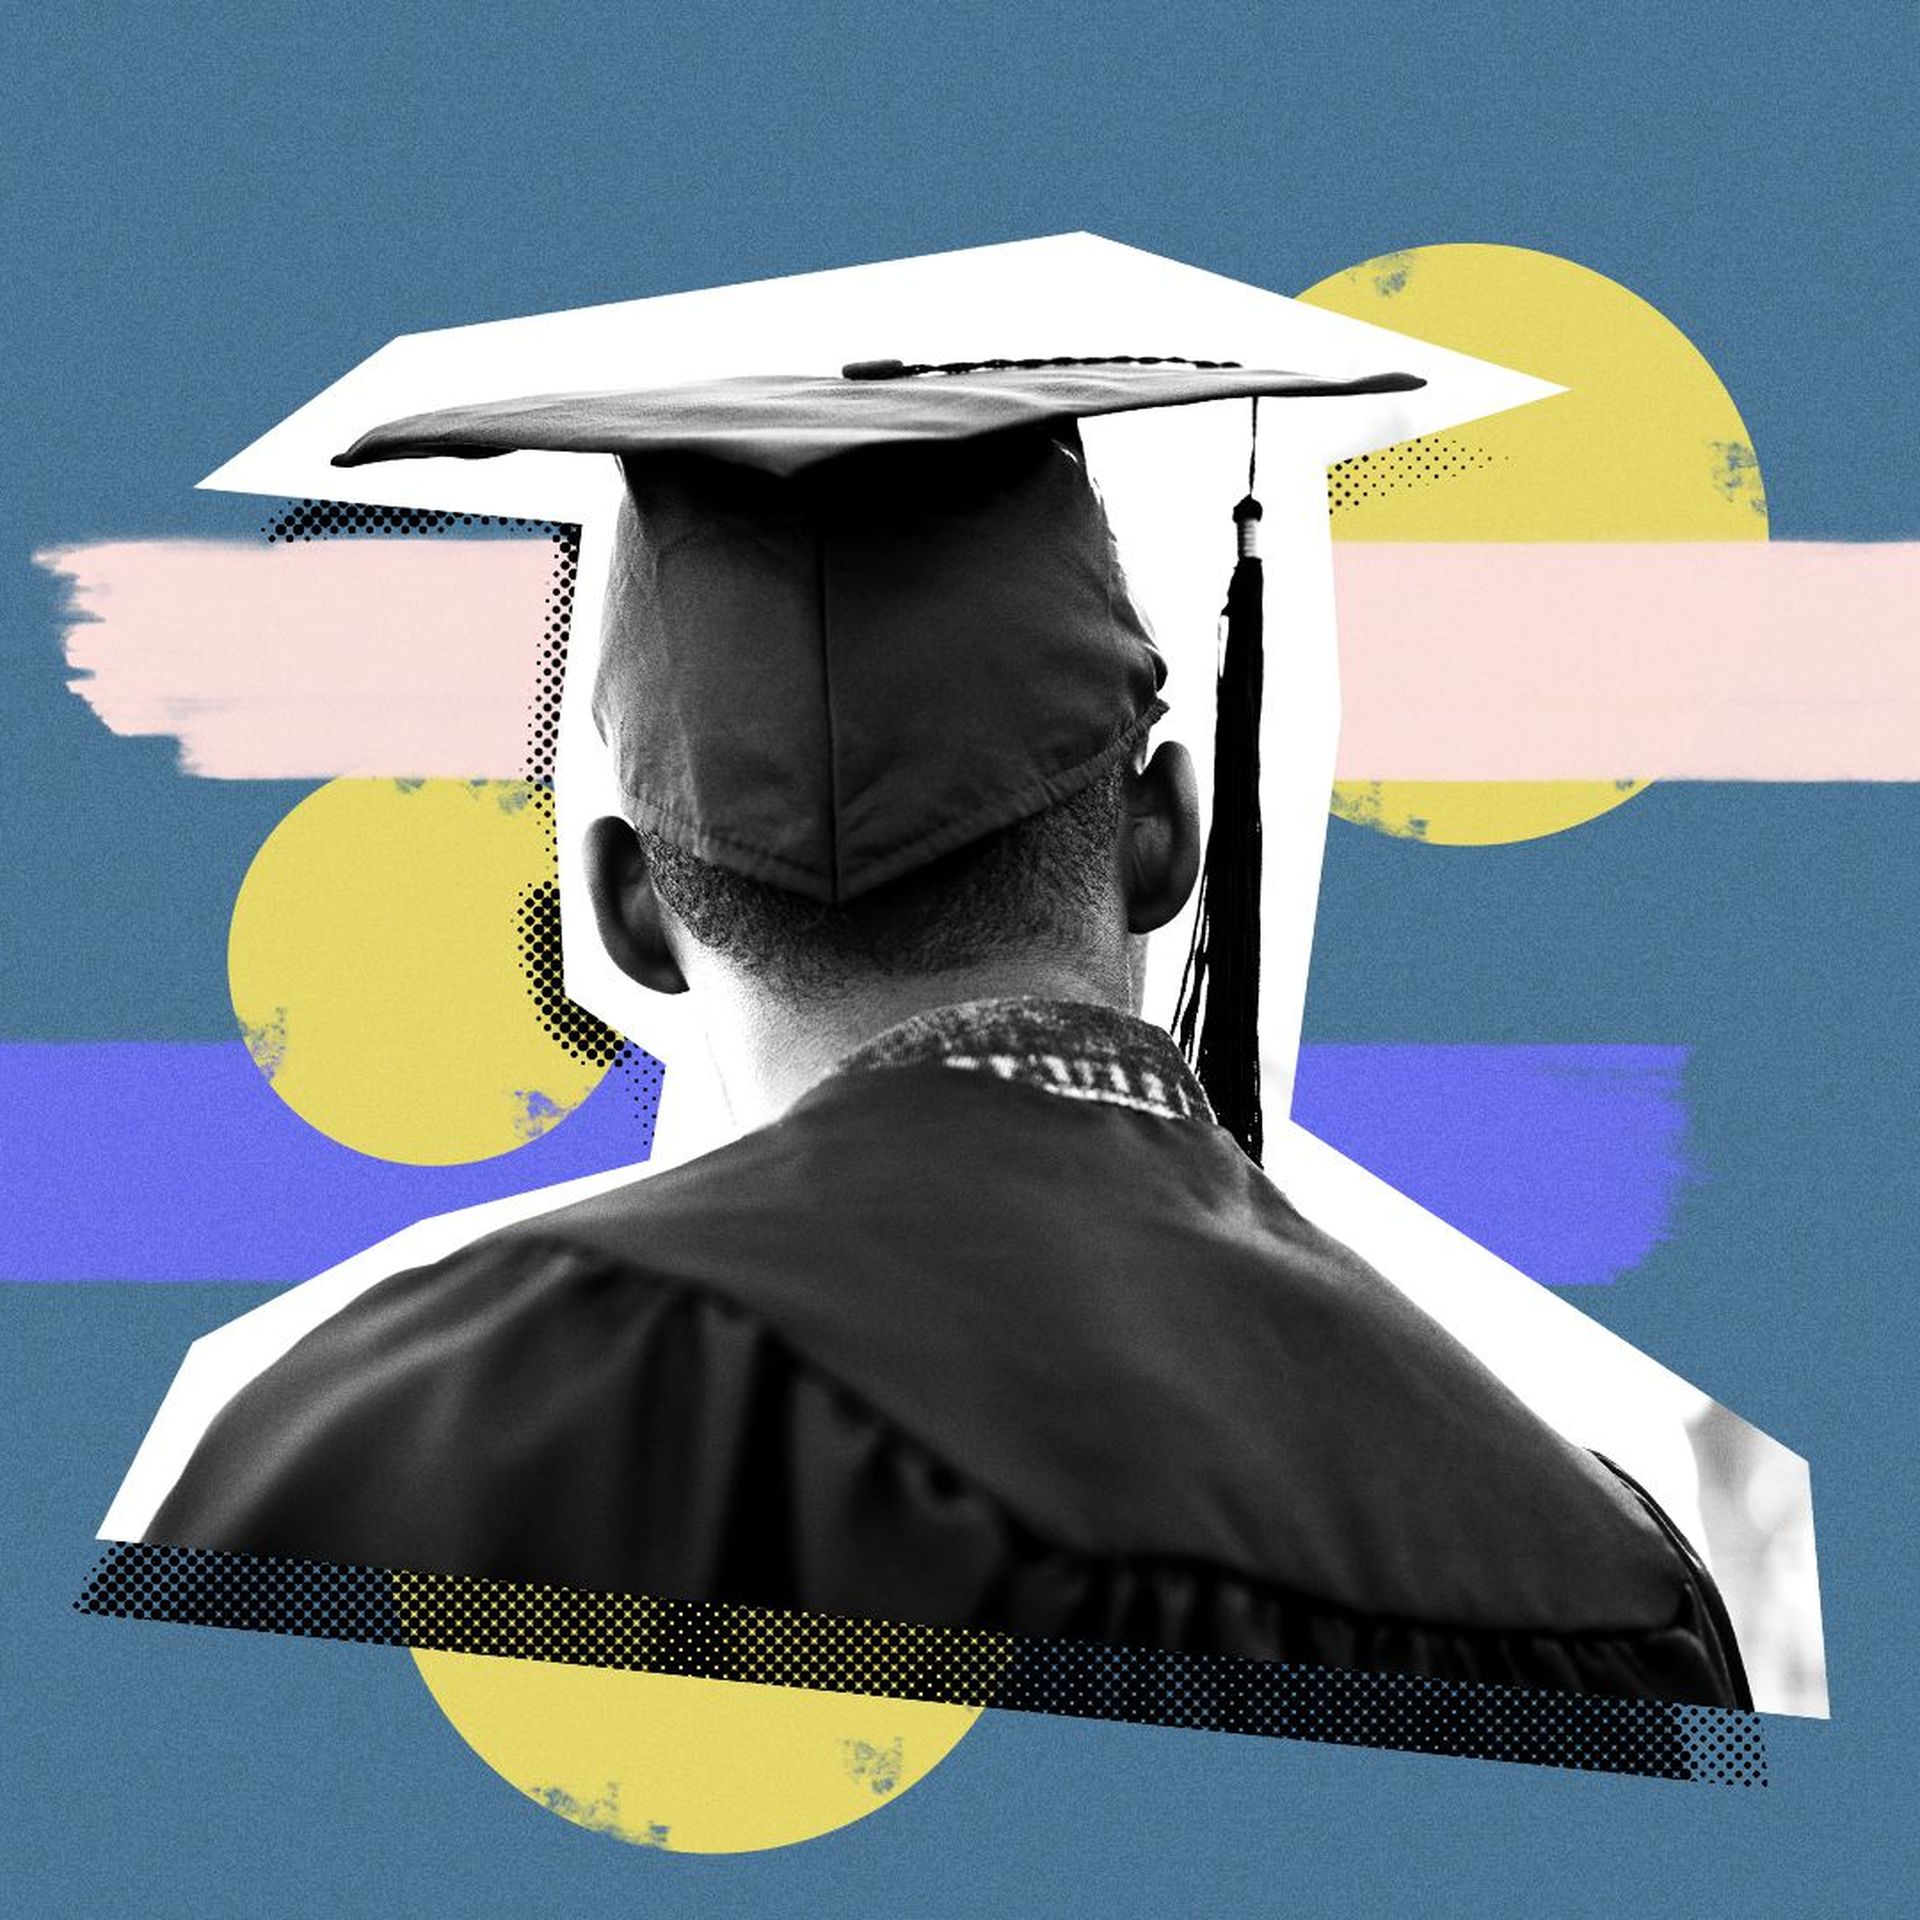 Illustration of a man in a graduation cap and gown from behind